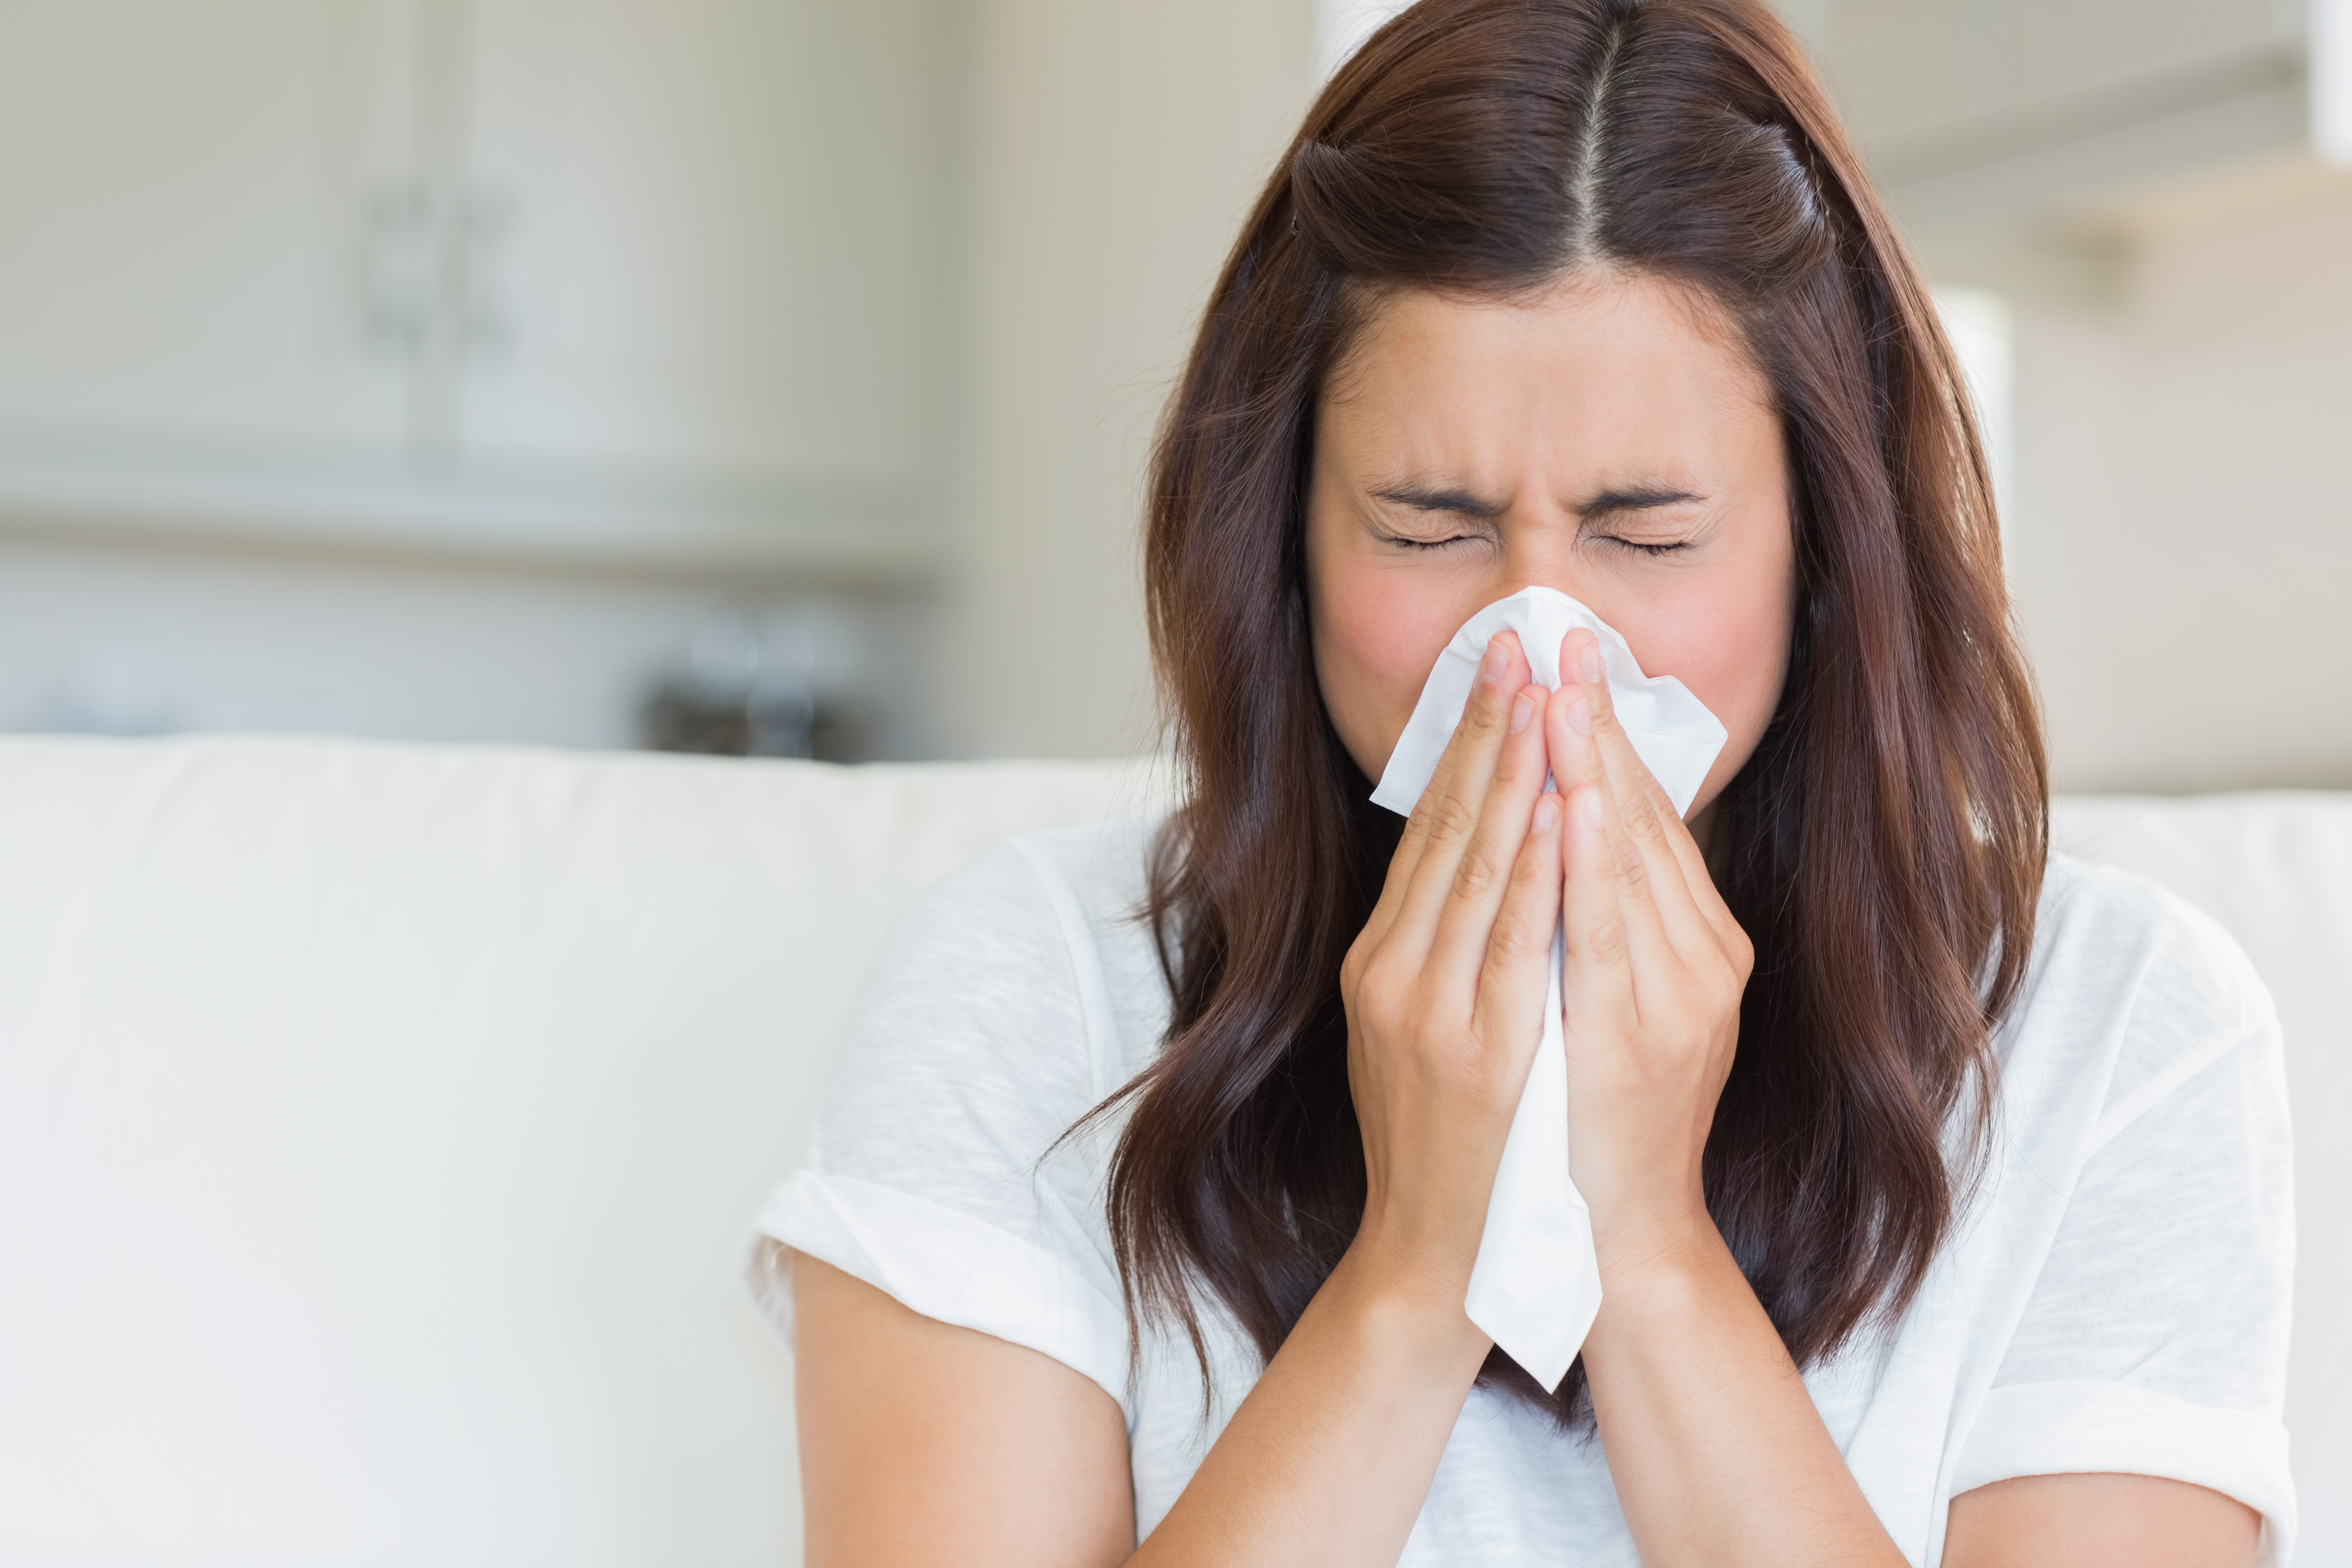 A woman sneezing with a tissue on her nose and mouth | Source: Shutterstock